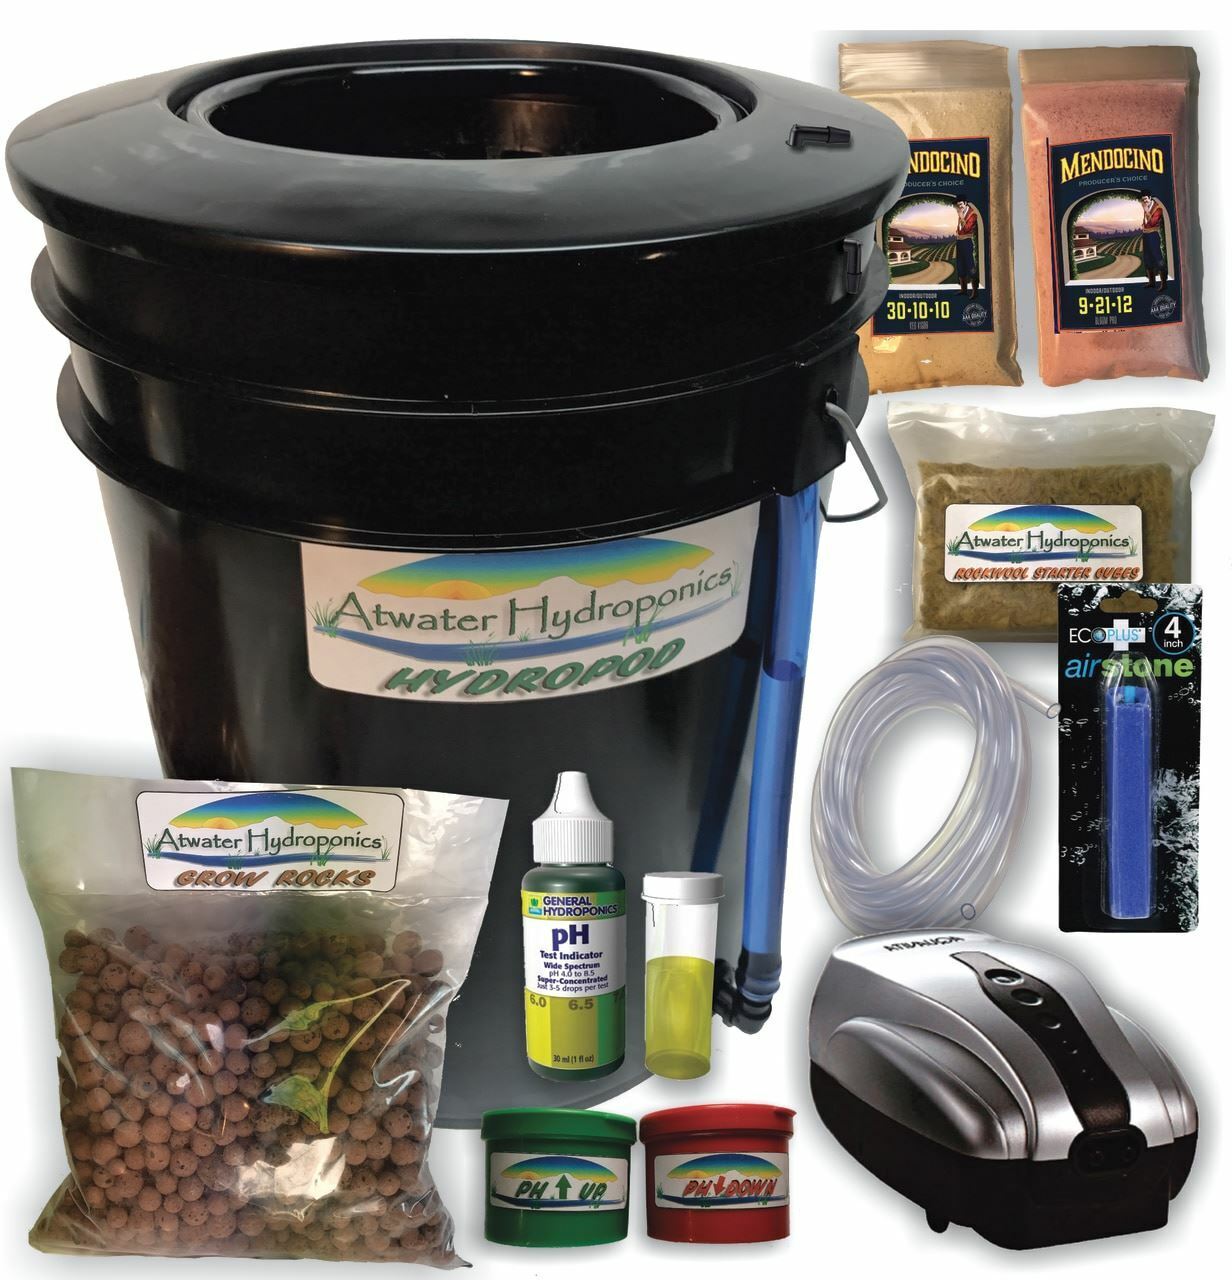 The Atwater HydroPod - Standard DWC System - Complete w/ Nutrients & pH Testing